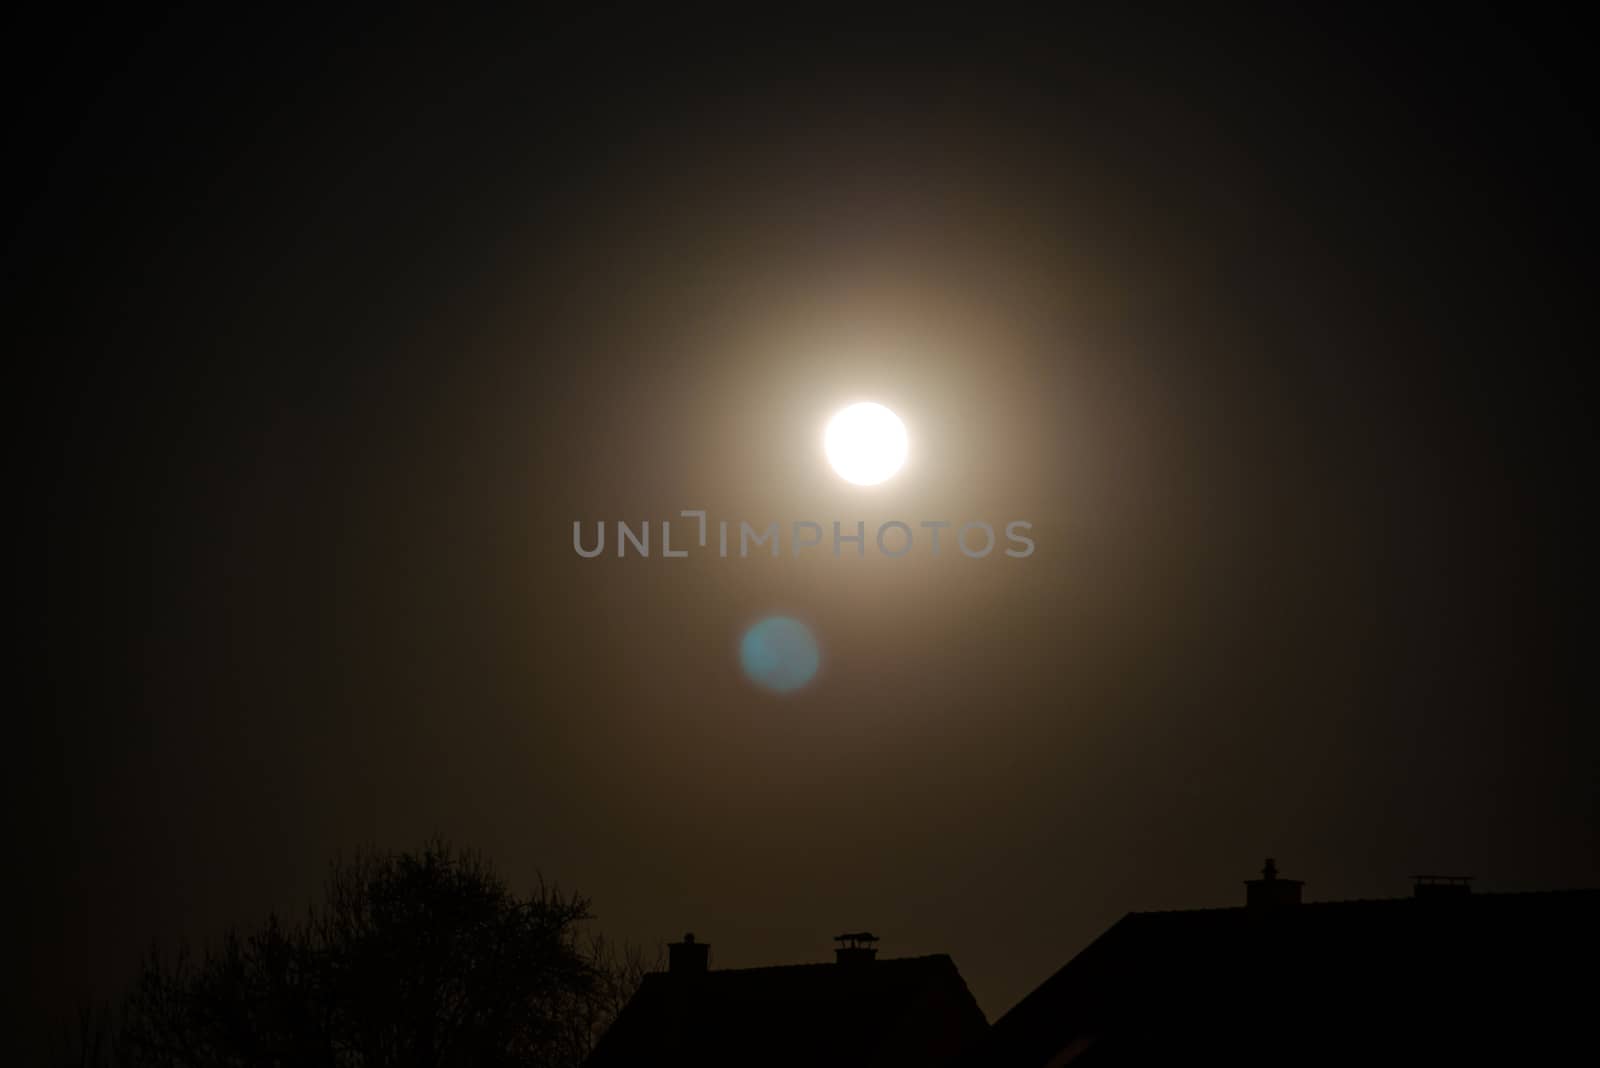 The moon being reflected by the camera lense and now visible in a second instance over buildings and trees